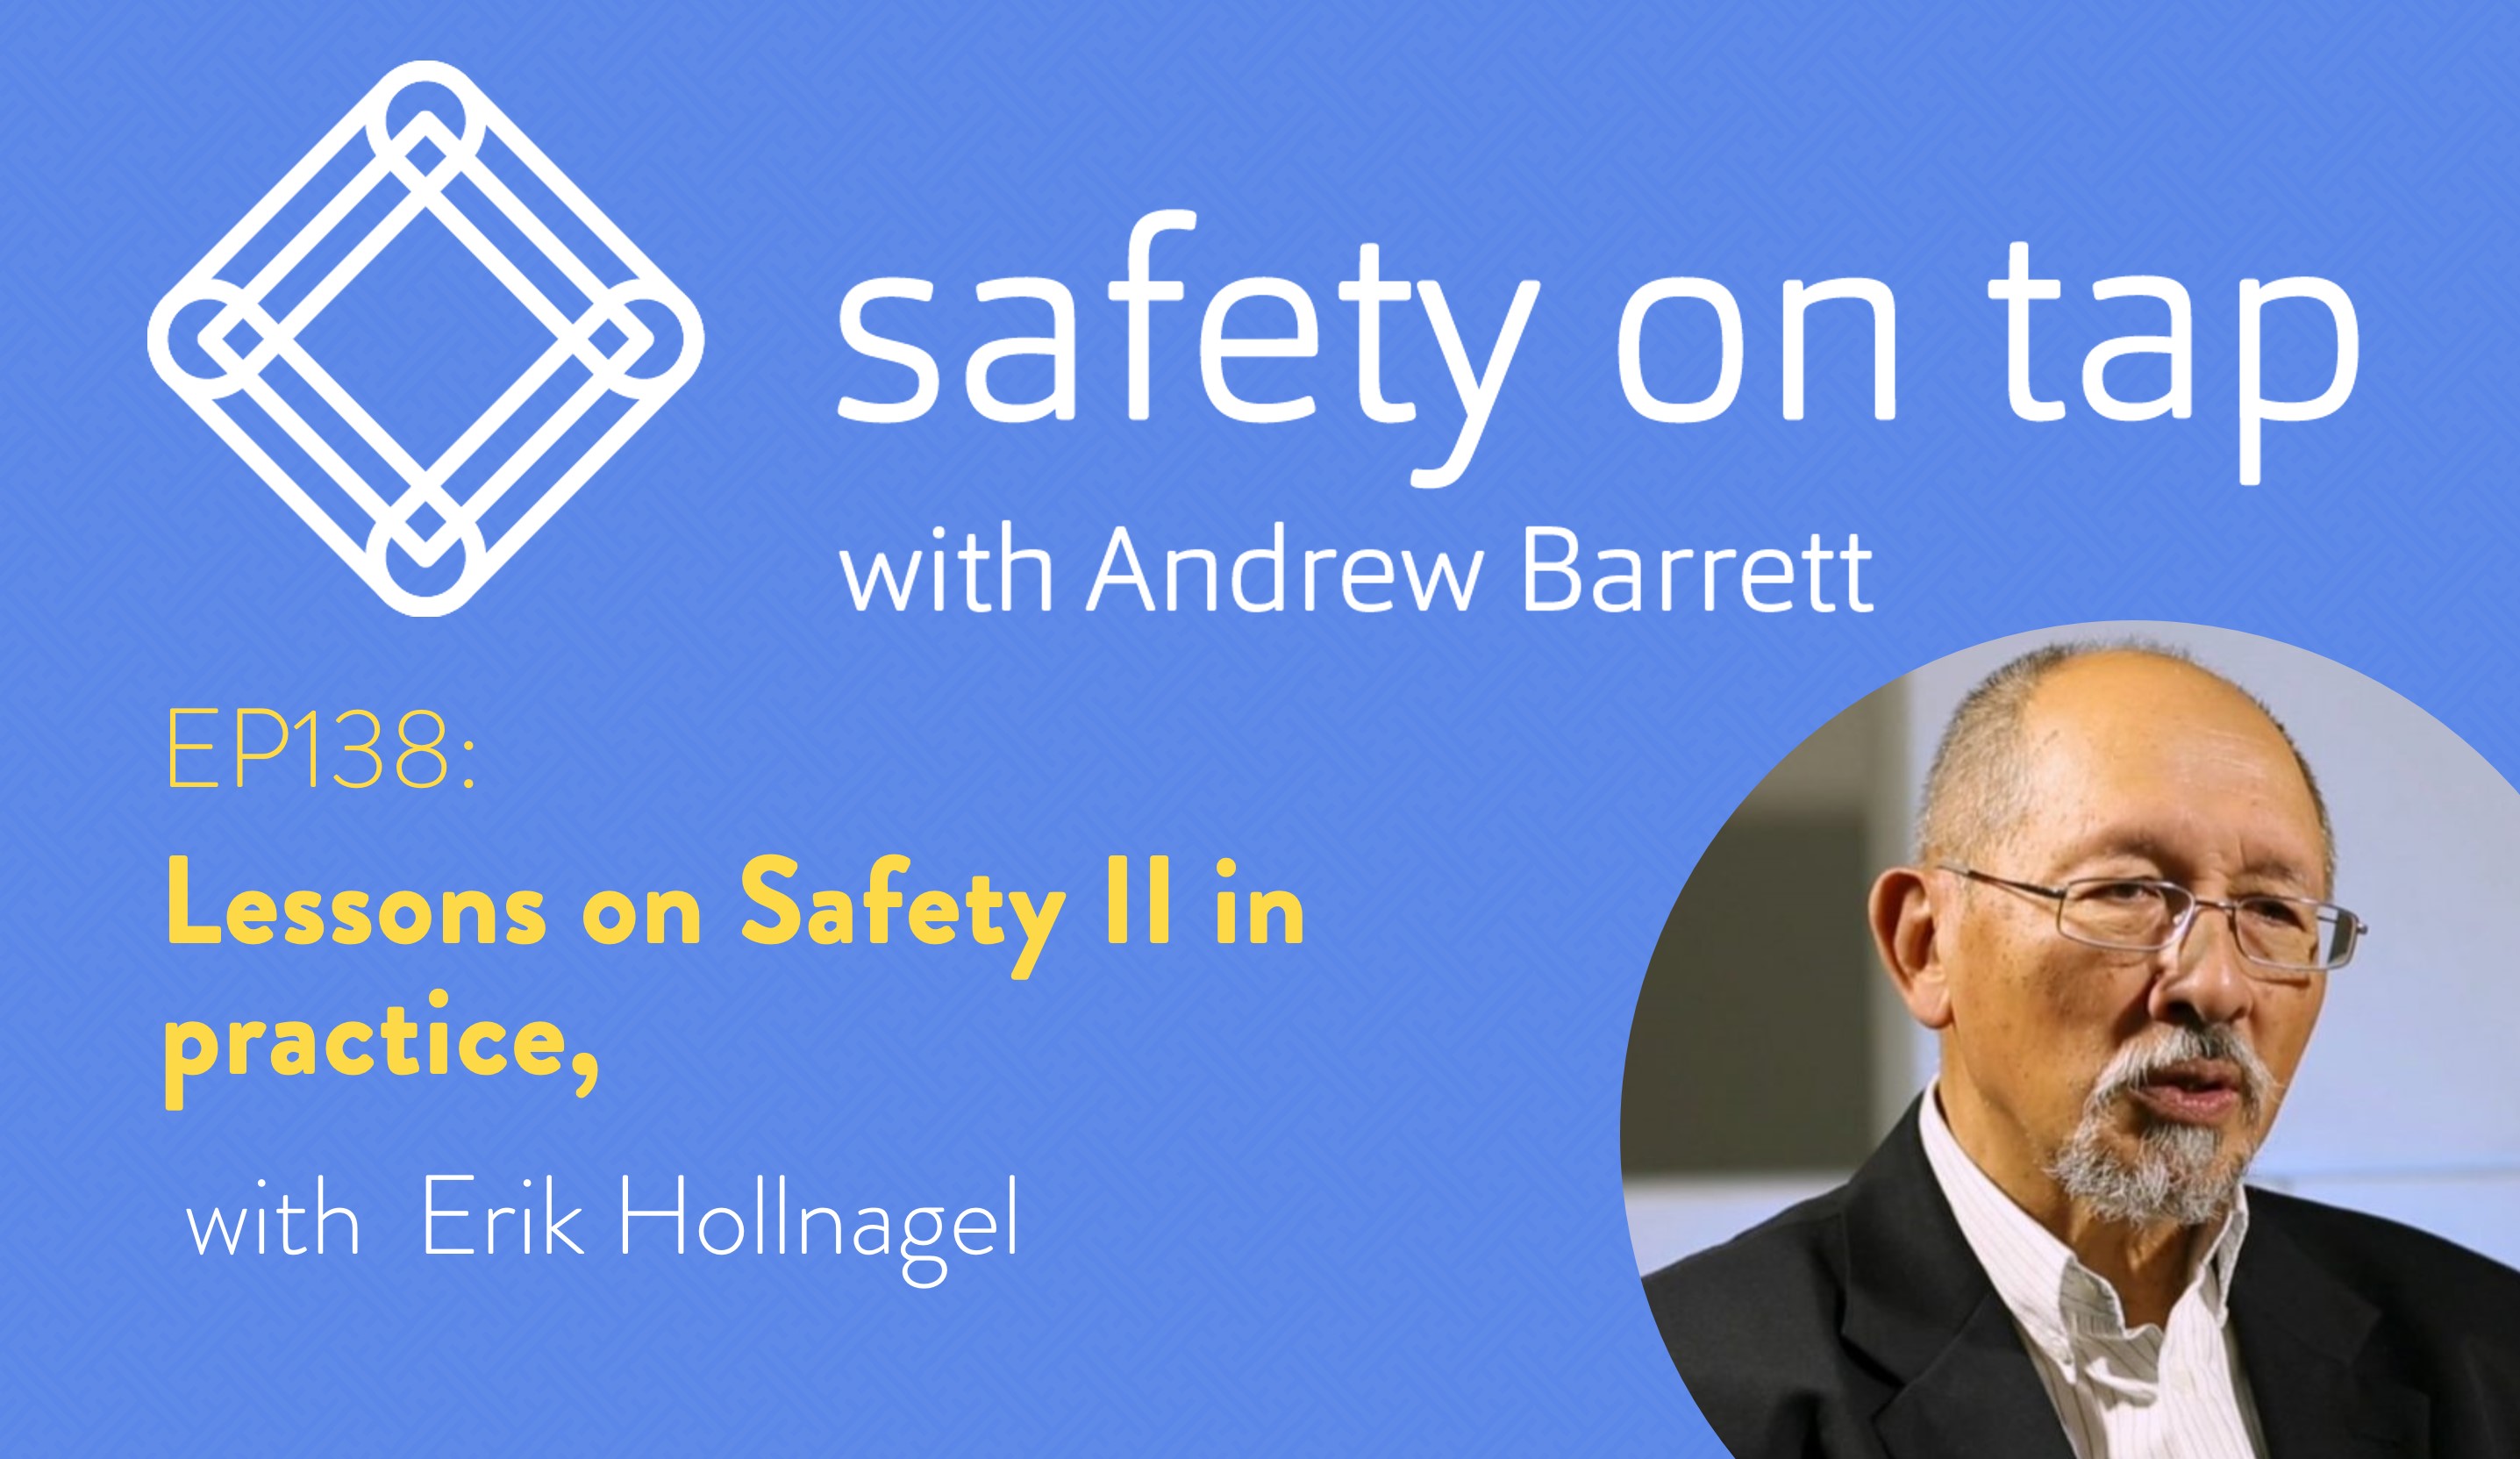 Ep138: Lessons on Safety II in practice, from Erik Hollnagel